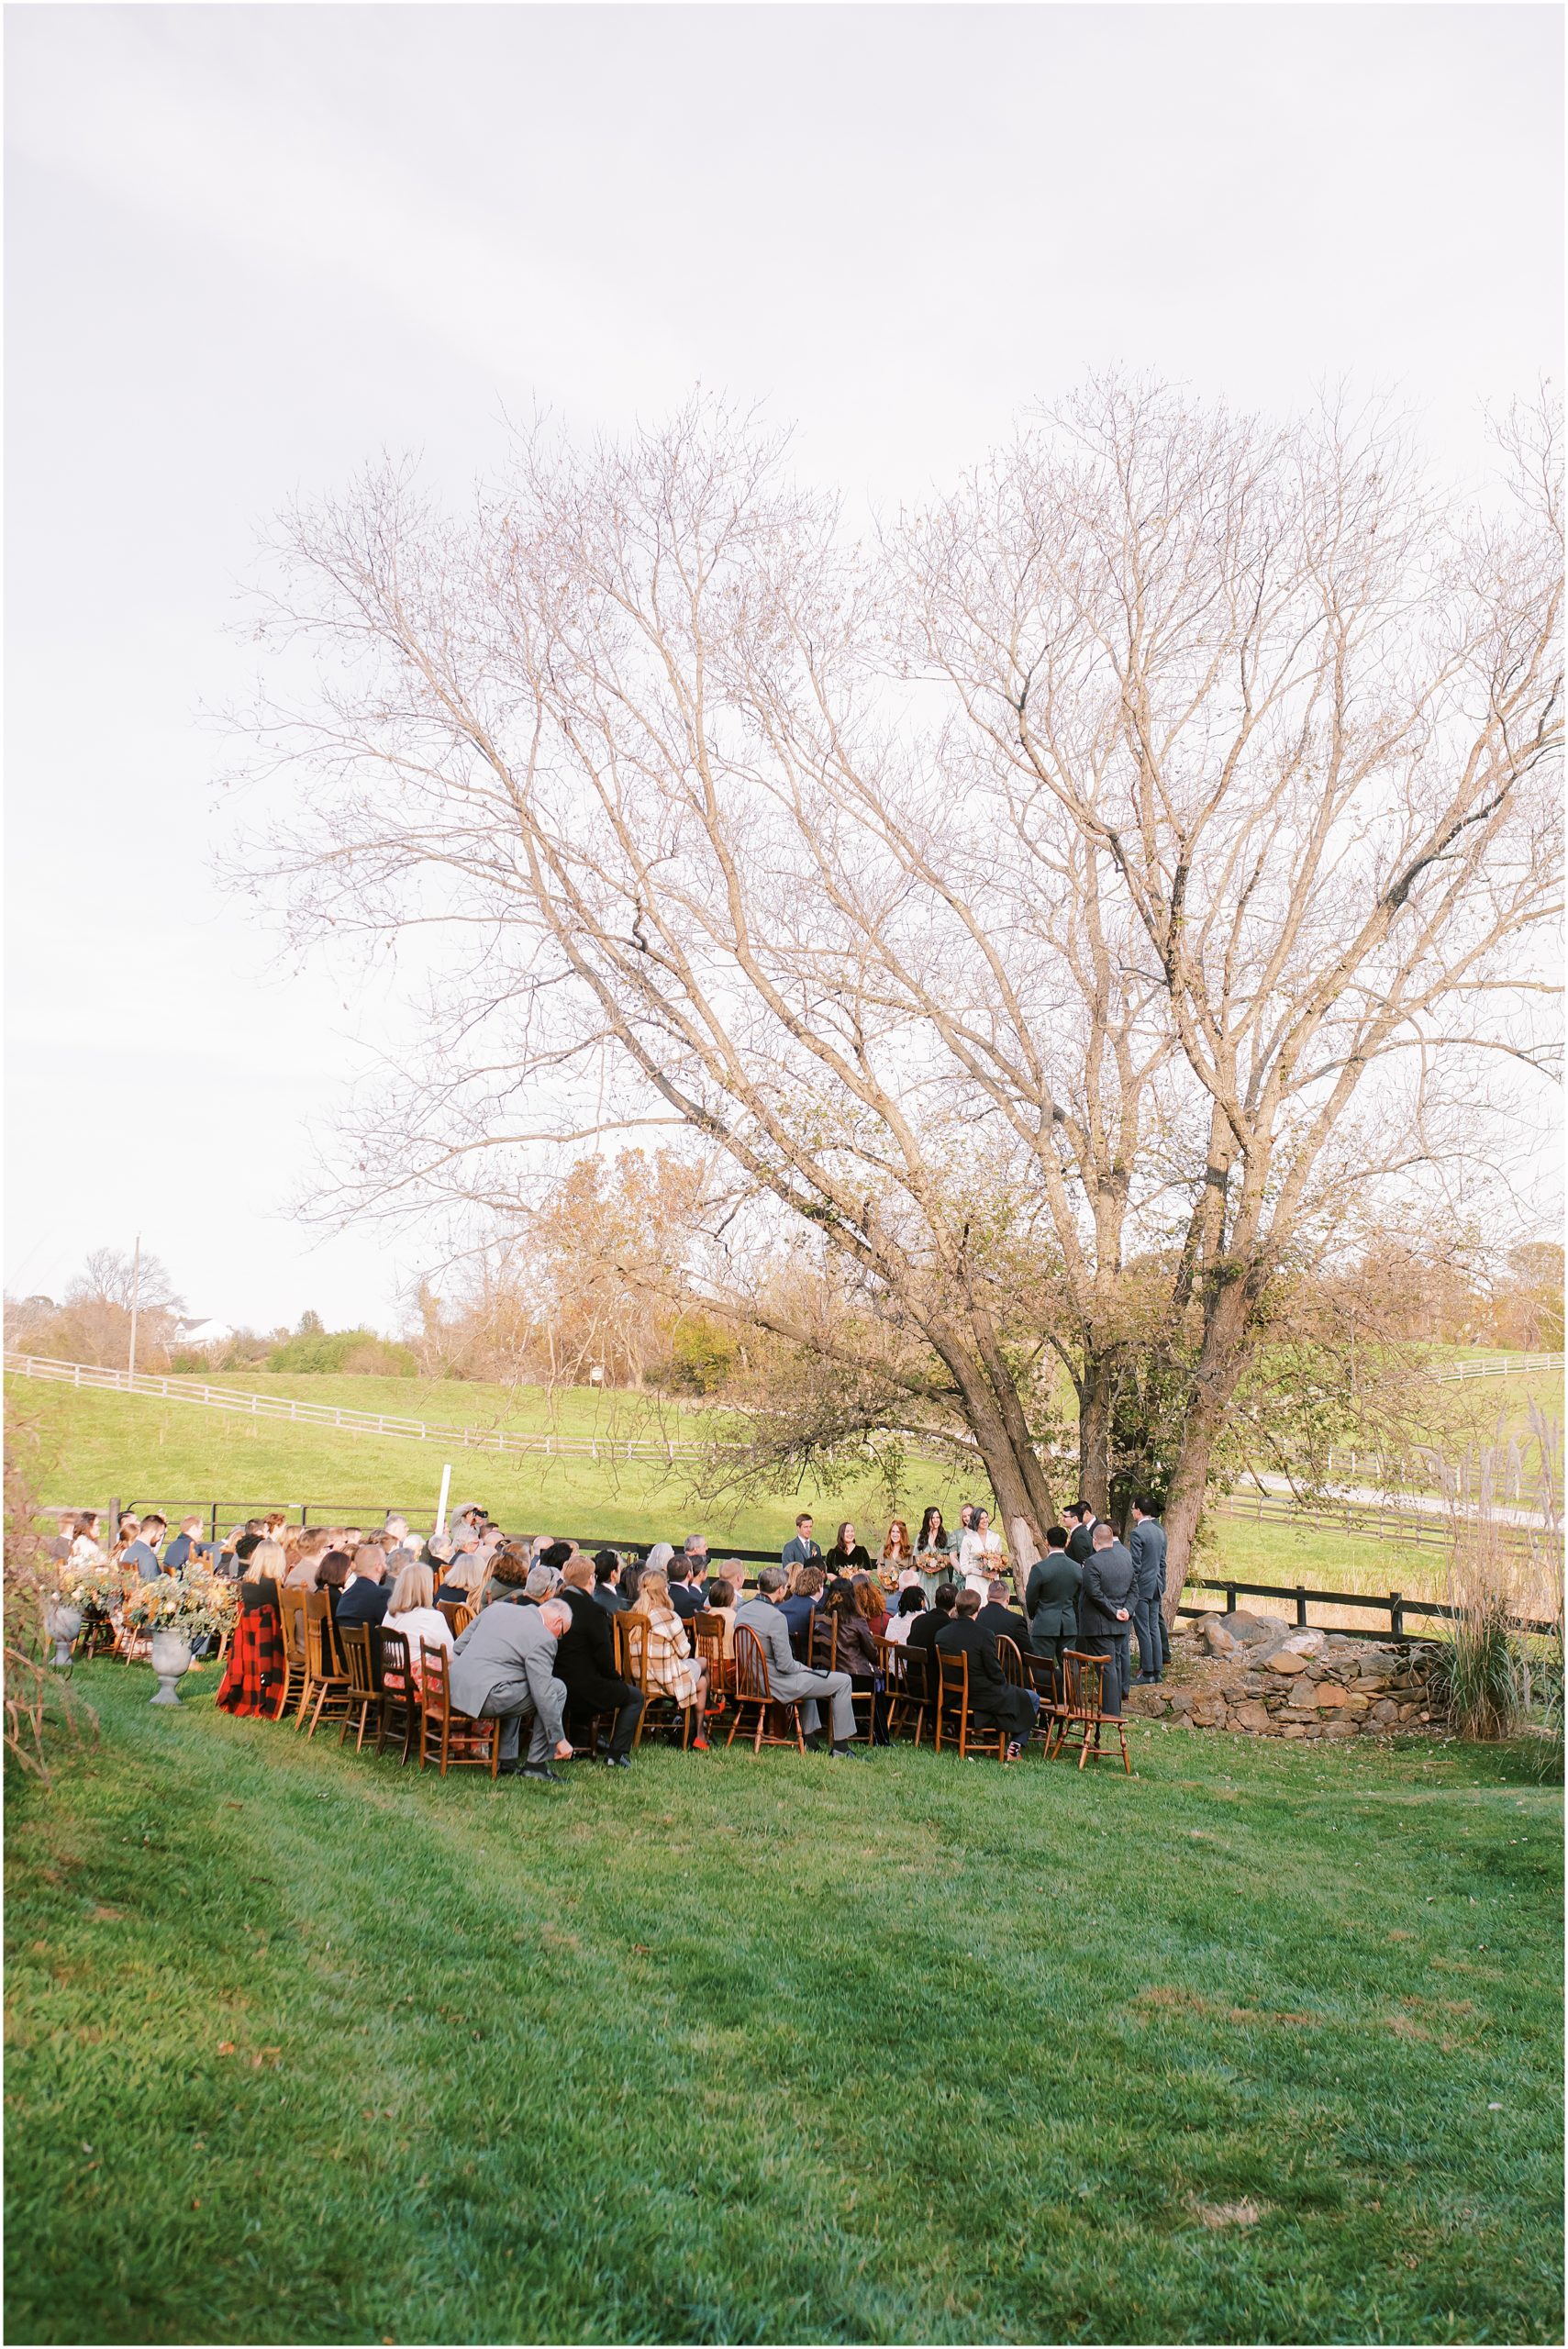 Wedding guests sitting for ceremony at Tranquility Farm